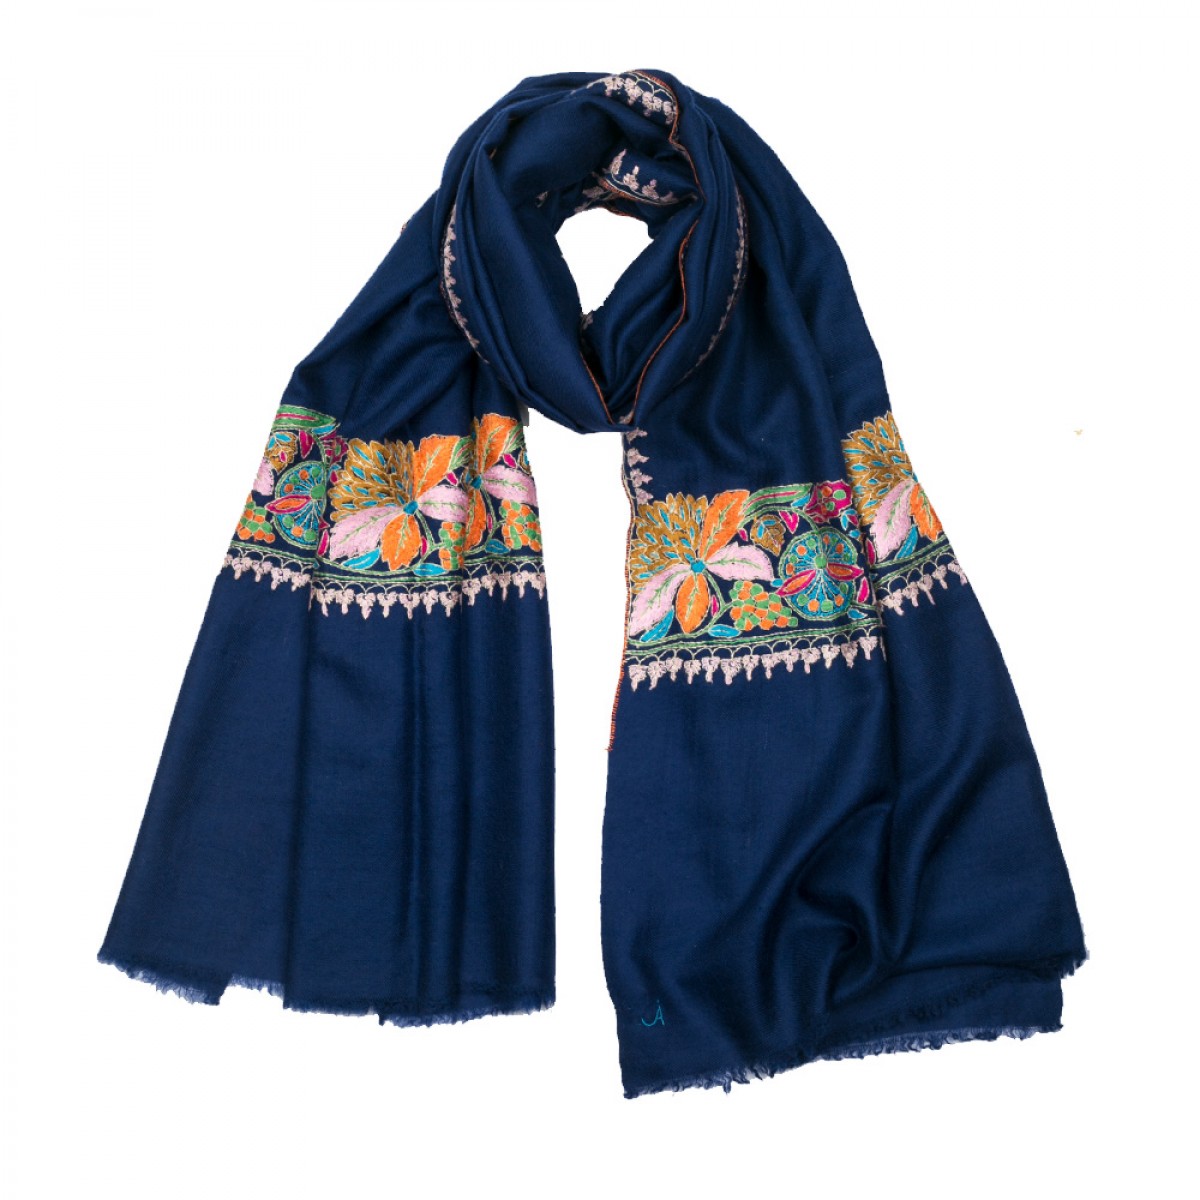 Embroidered Pashmina Stole - Deep Blue